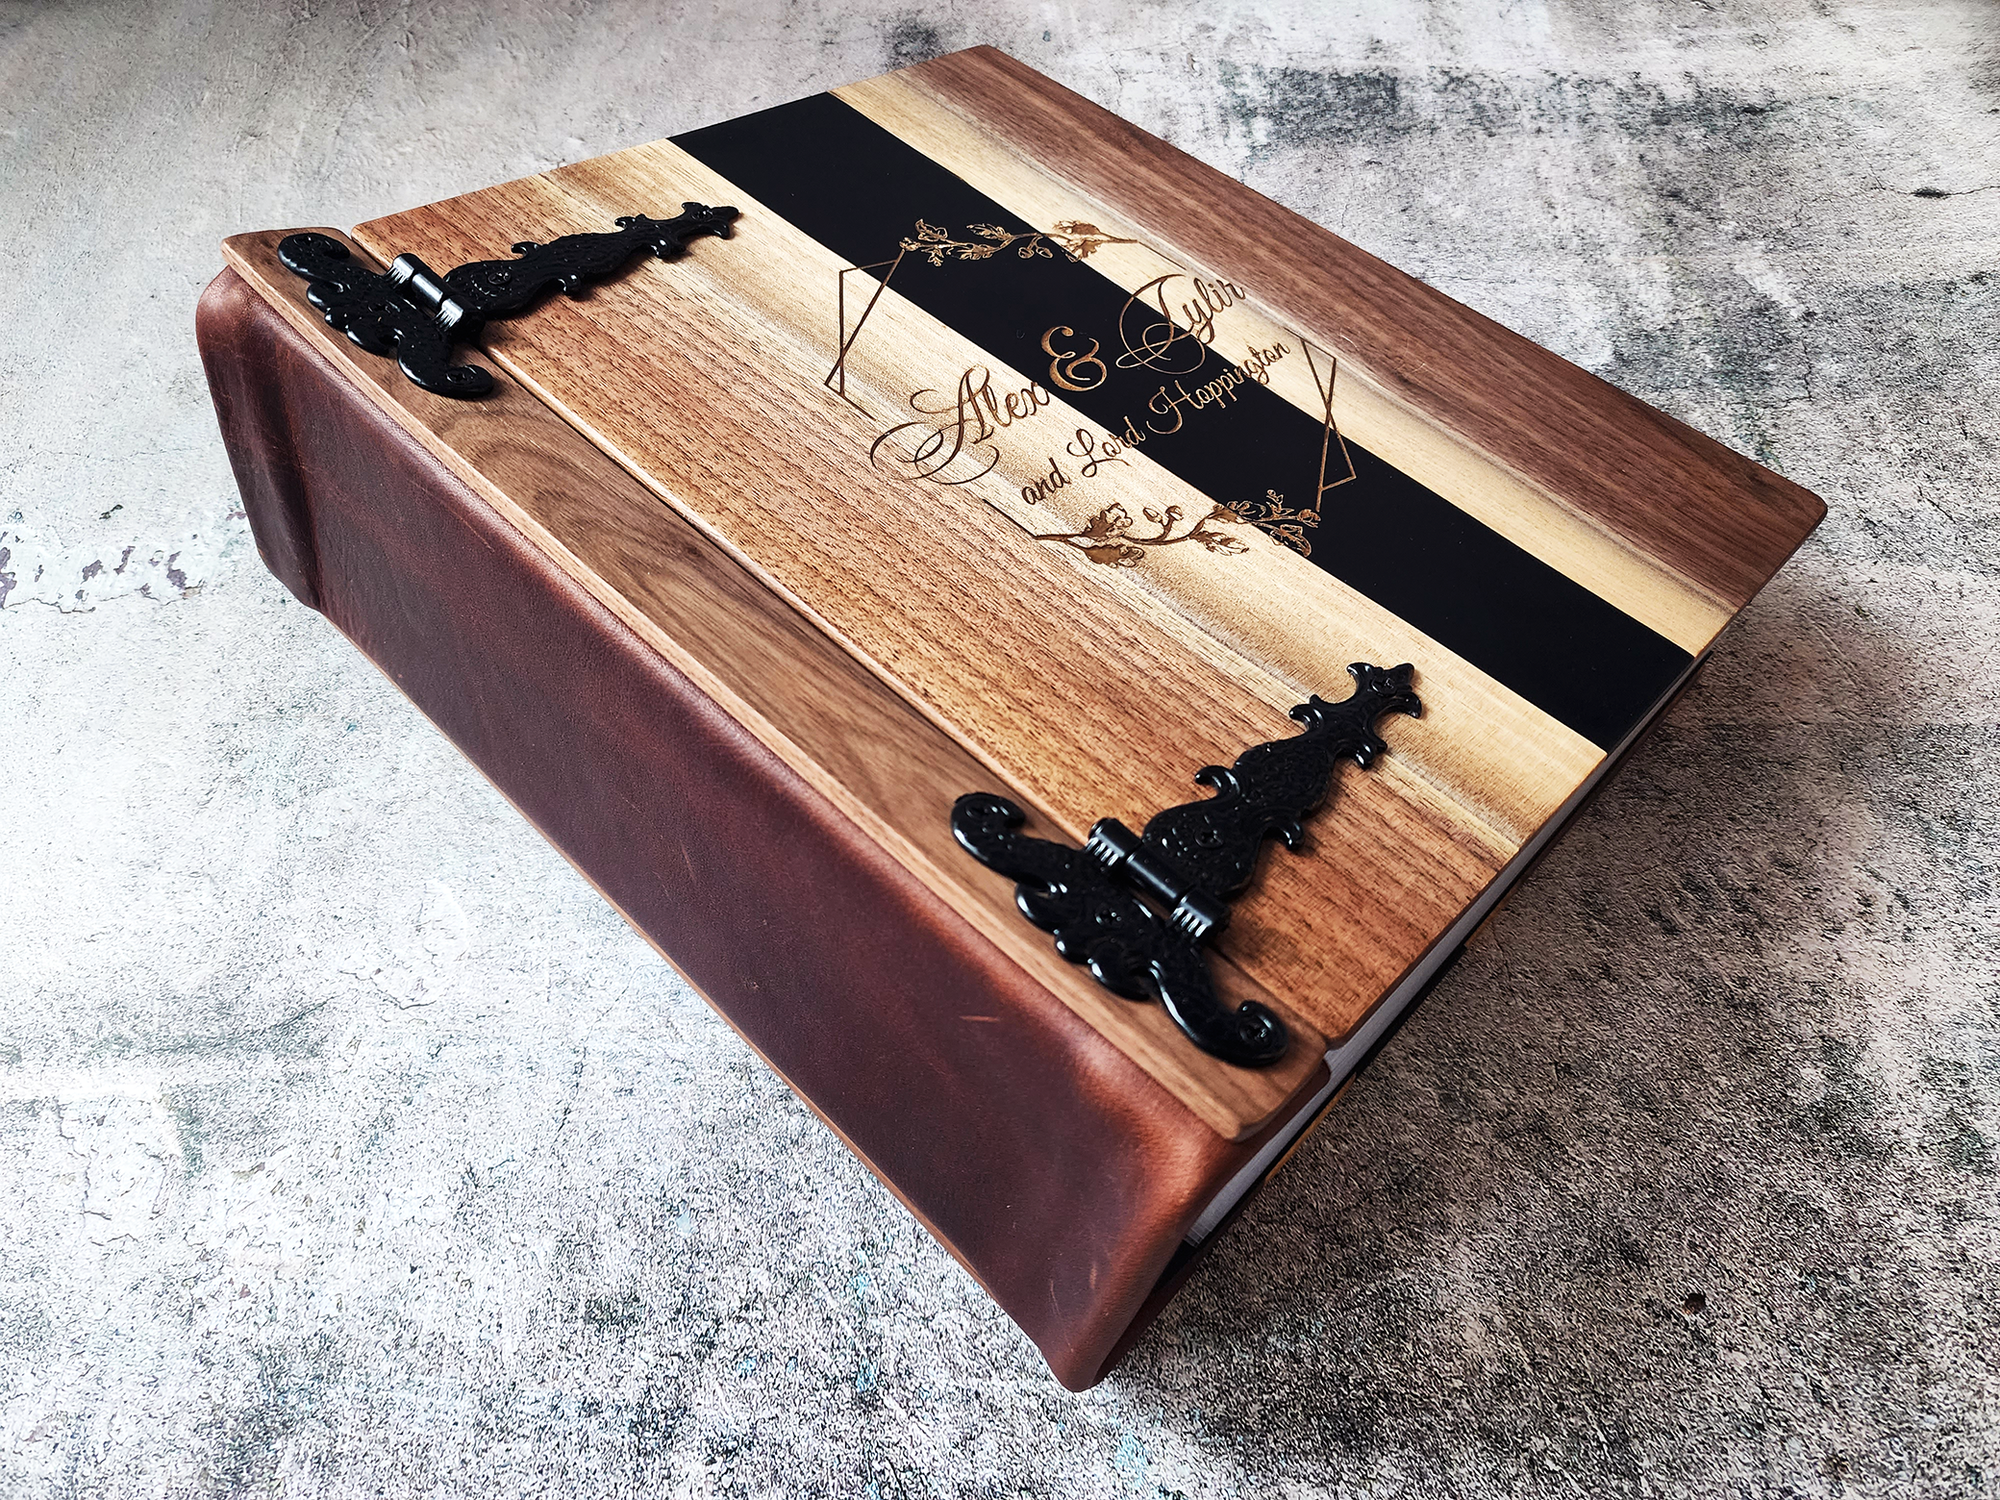  Personalized wedding guest book with river table wood cover by Tylir Wisdom at Rustic Engravings.